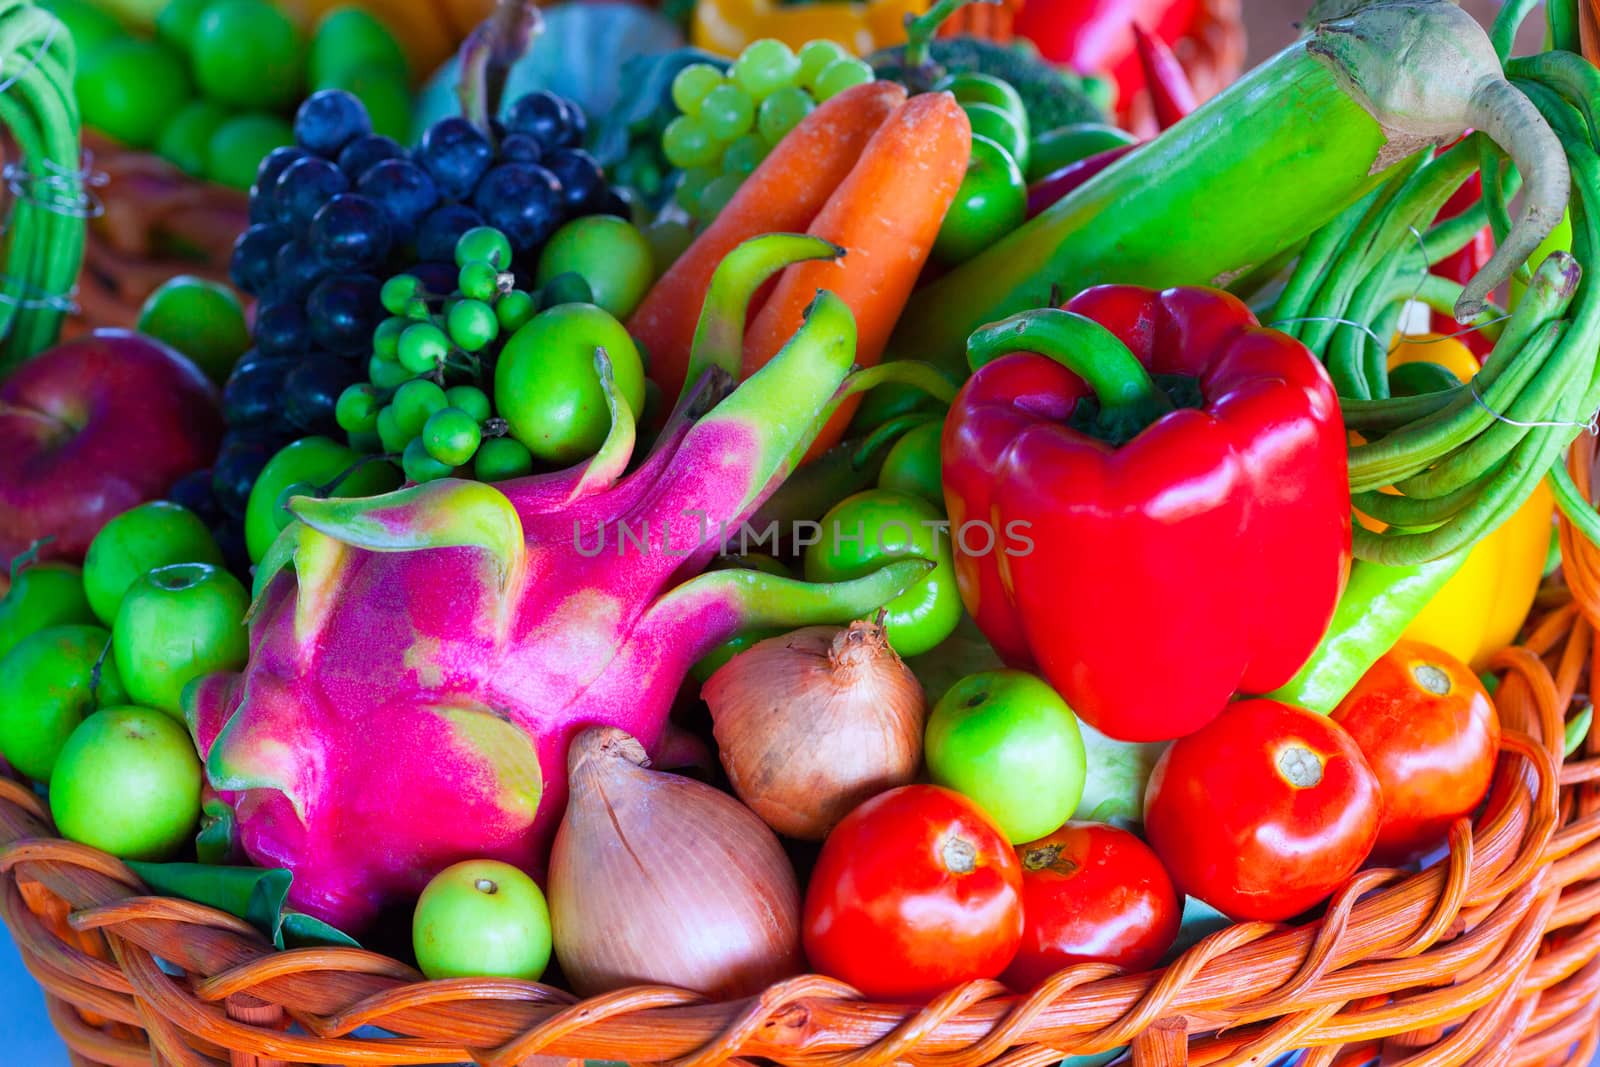 Tropical fruits and Vegetables